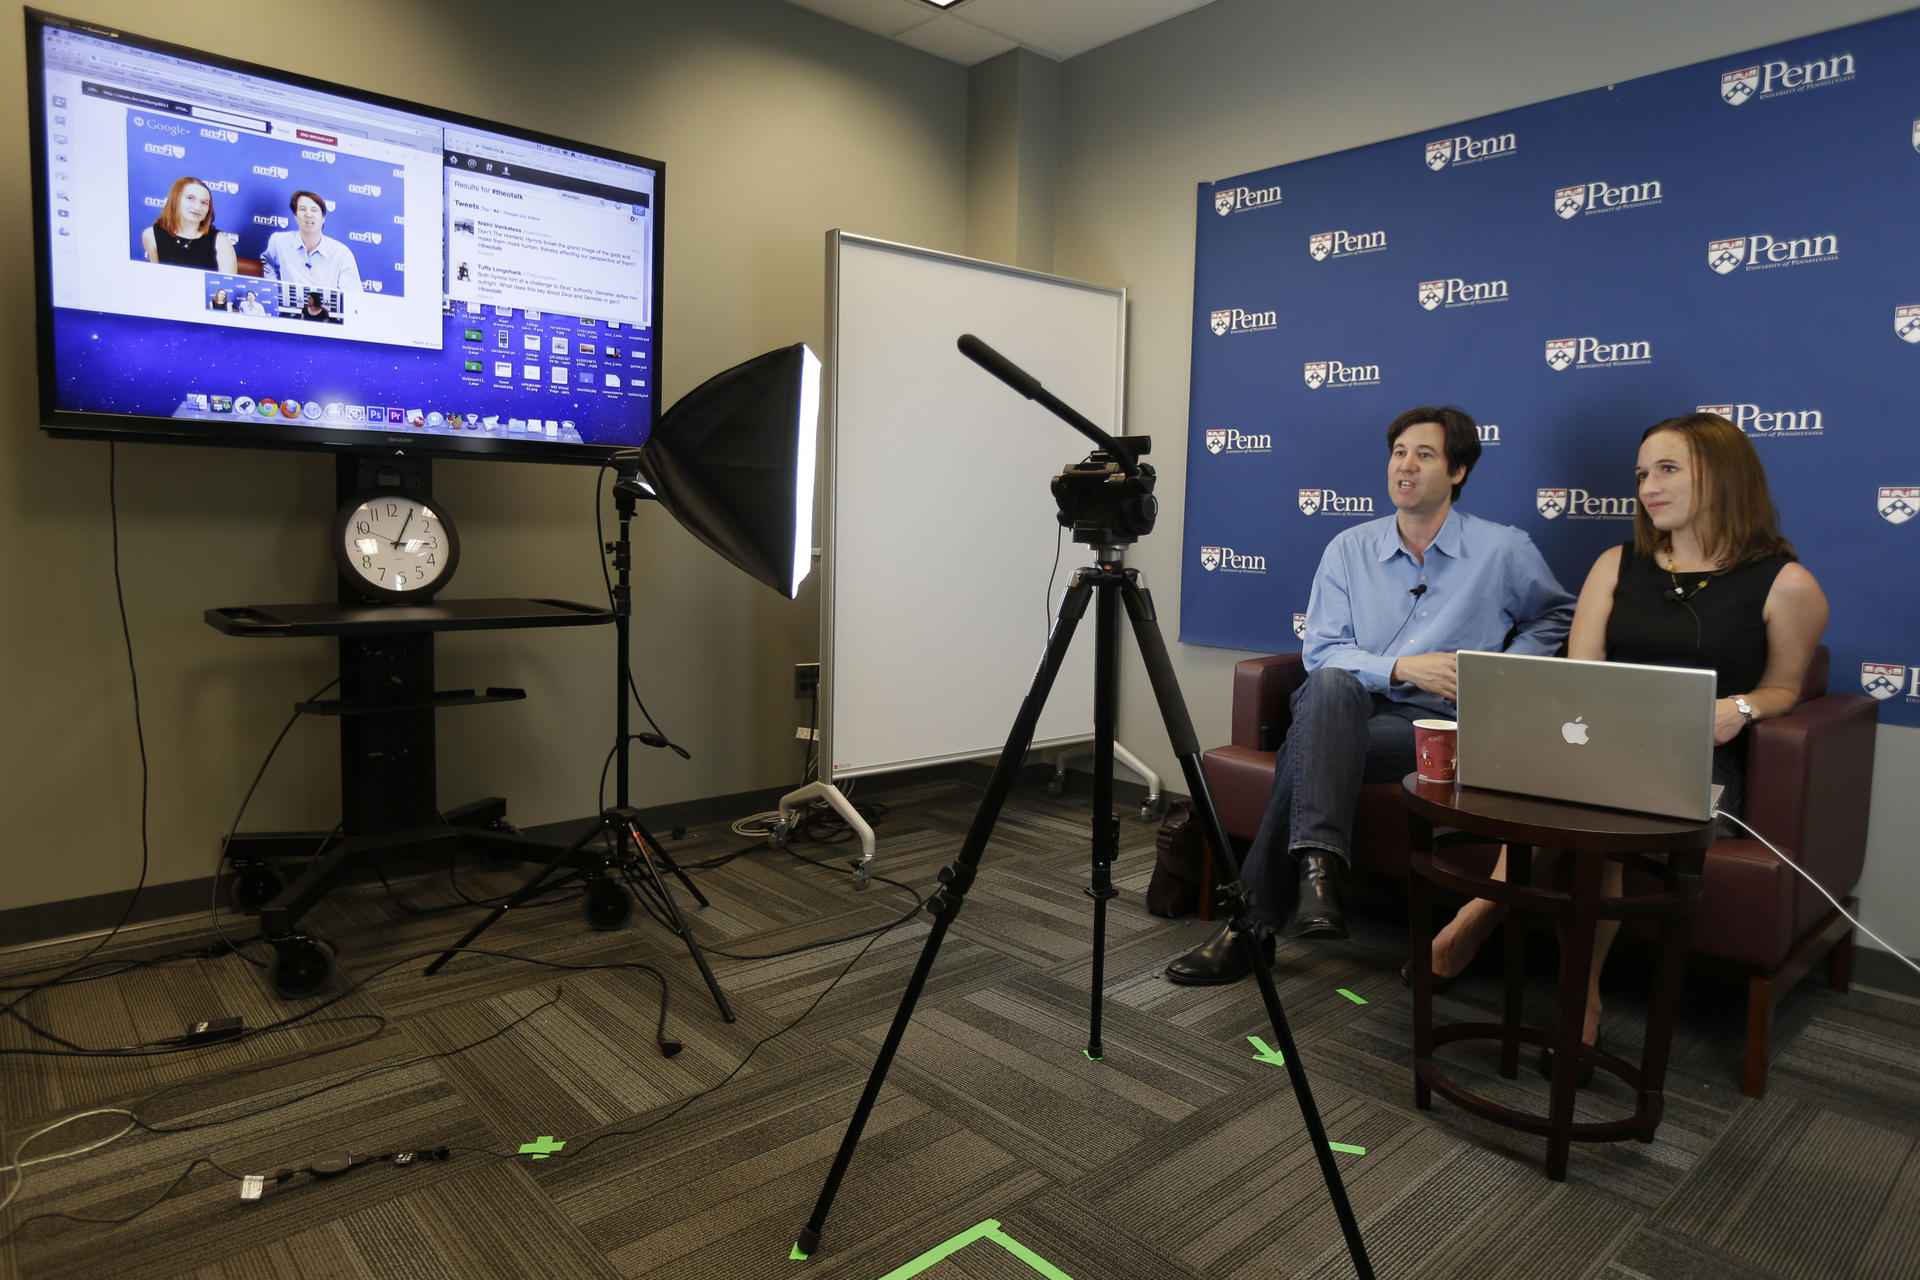 Professor Peter Struck (left) and assistant Cat Gillespie teach a mythology class during the recording of a Mooc. Photo: AFP